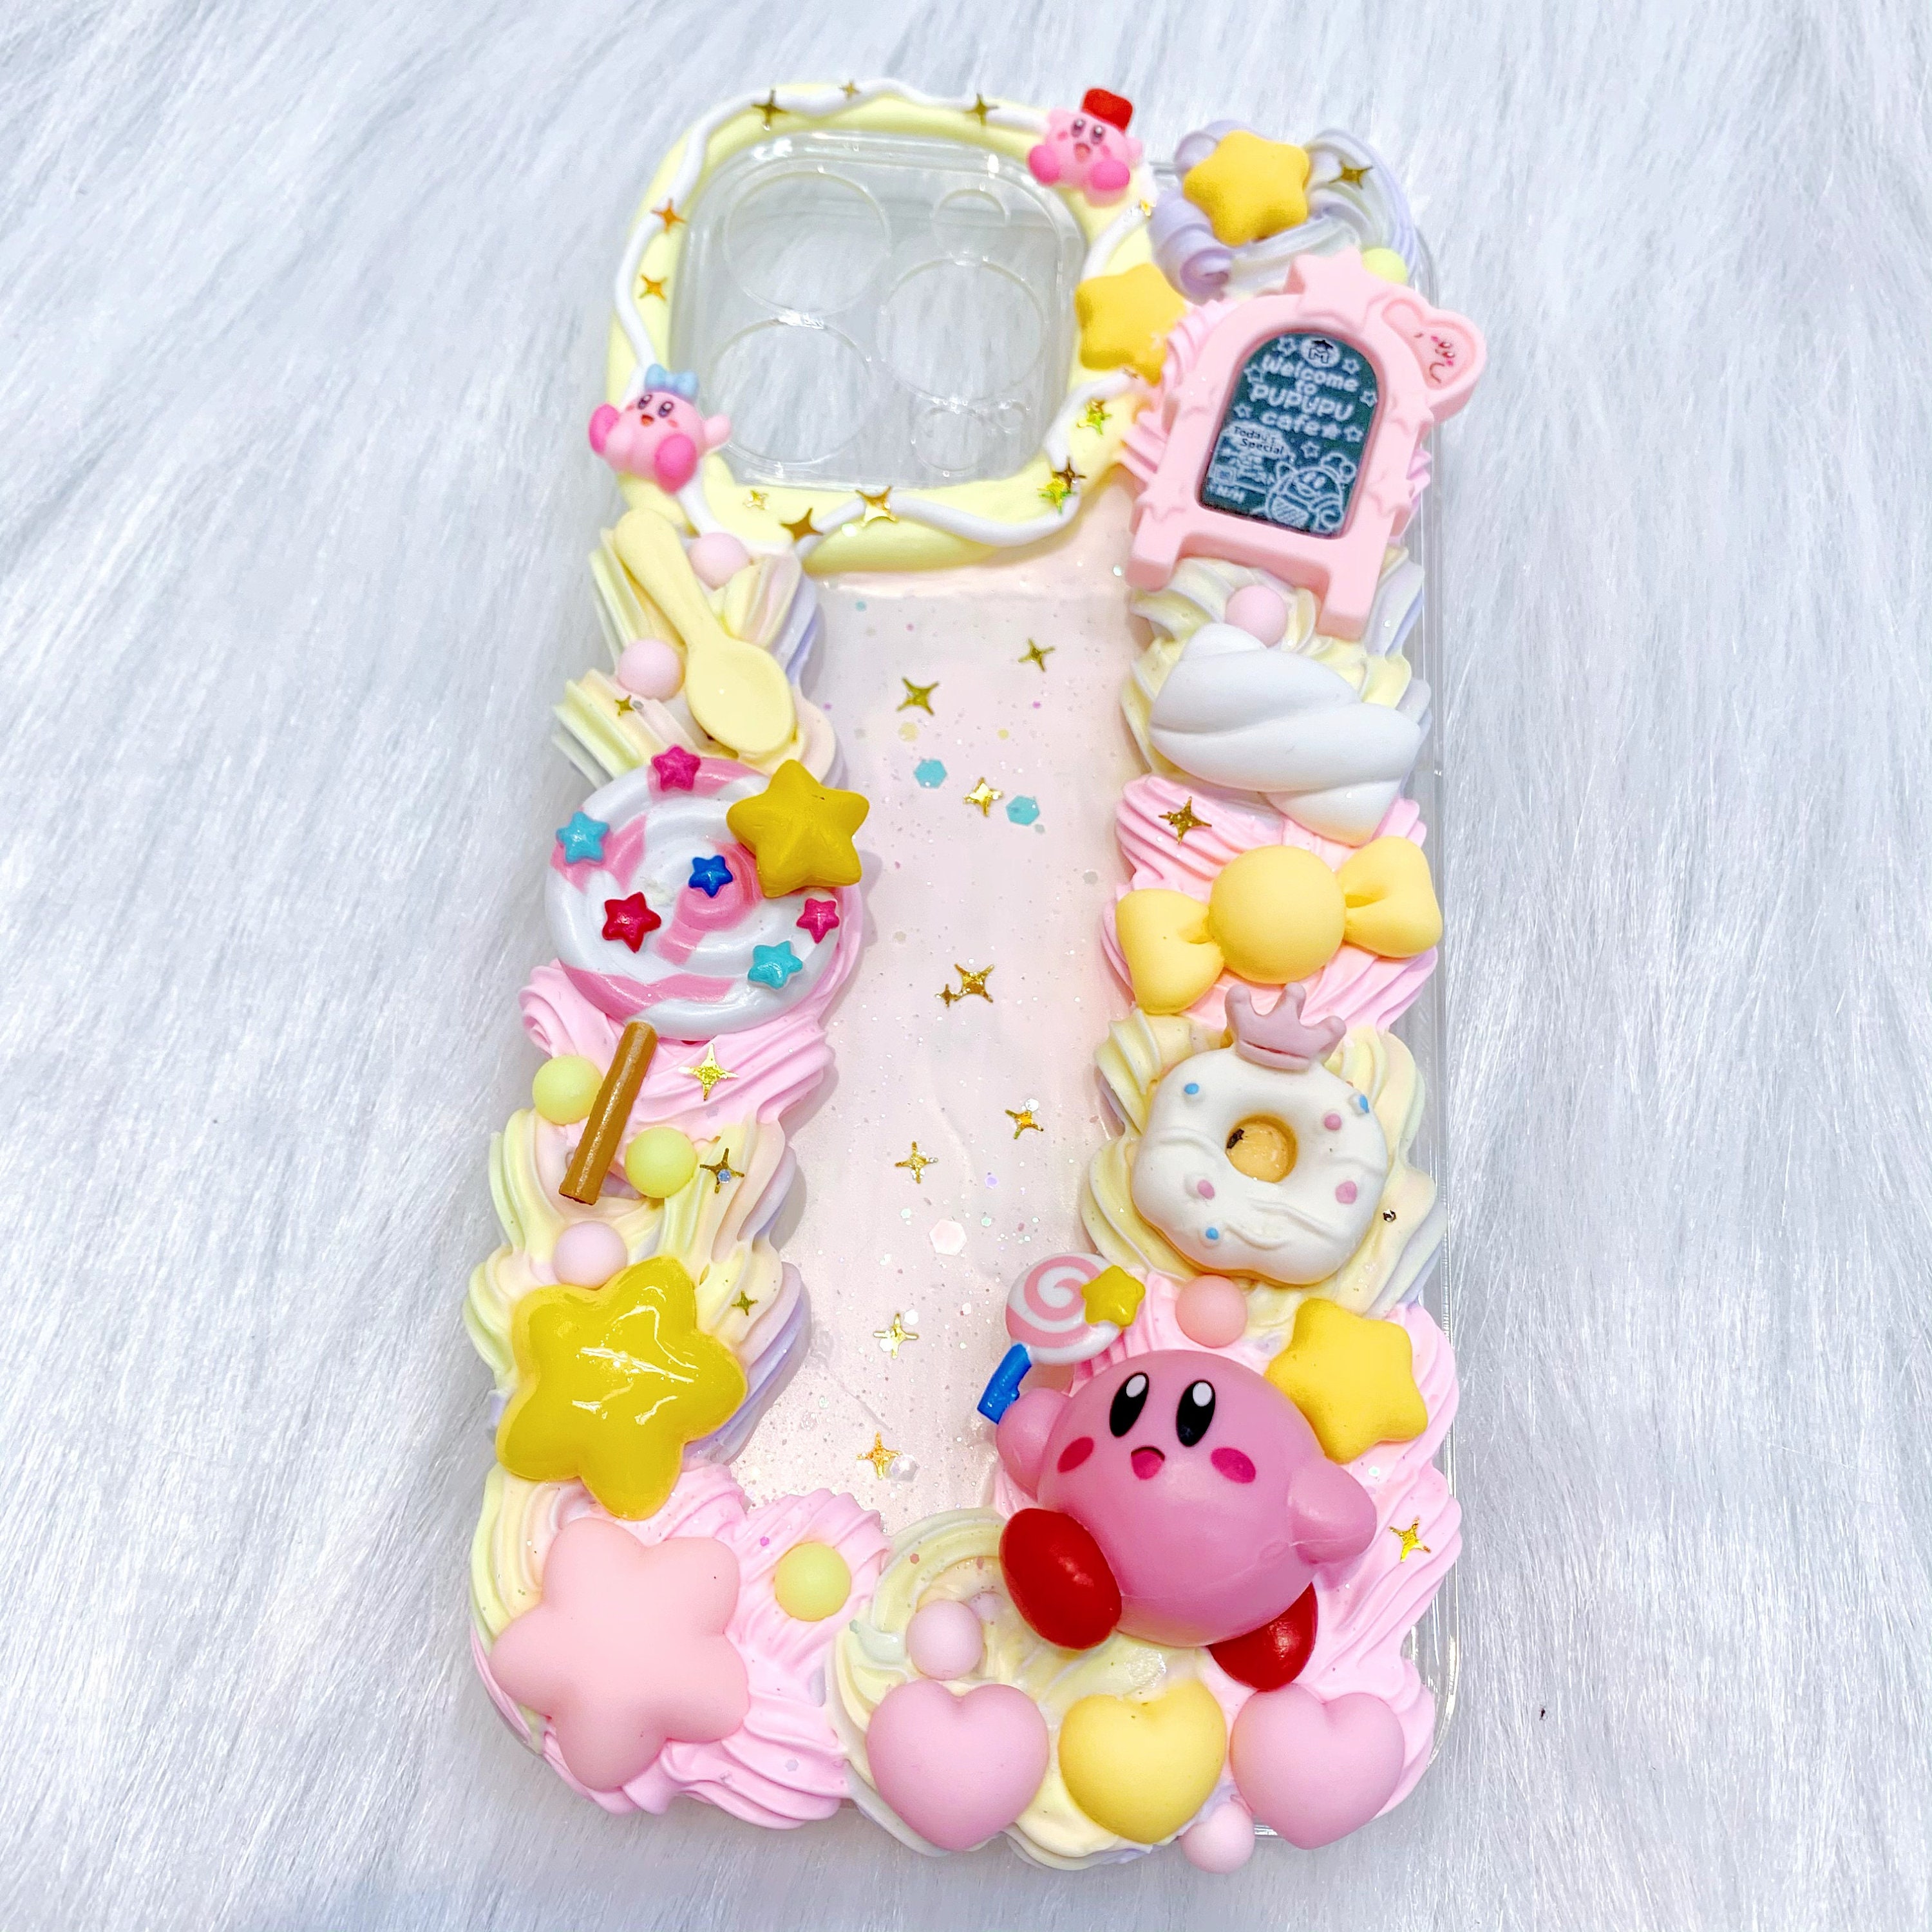 iPhone 14 Pro Max Halloween Melody decoden case 🎃💖